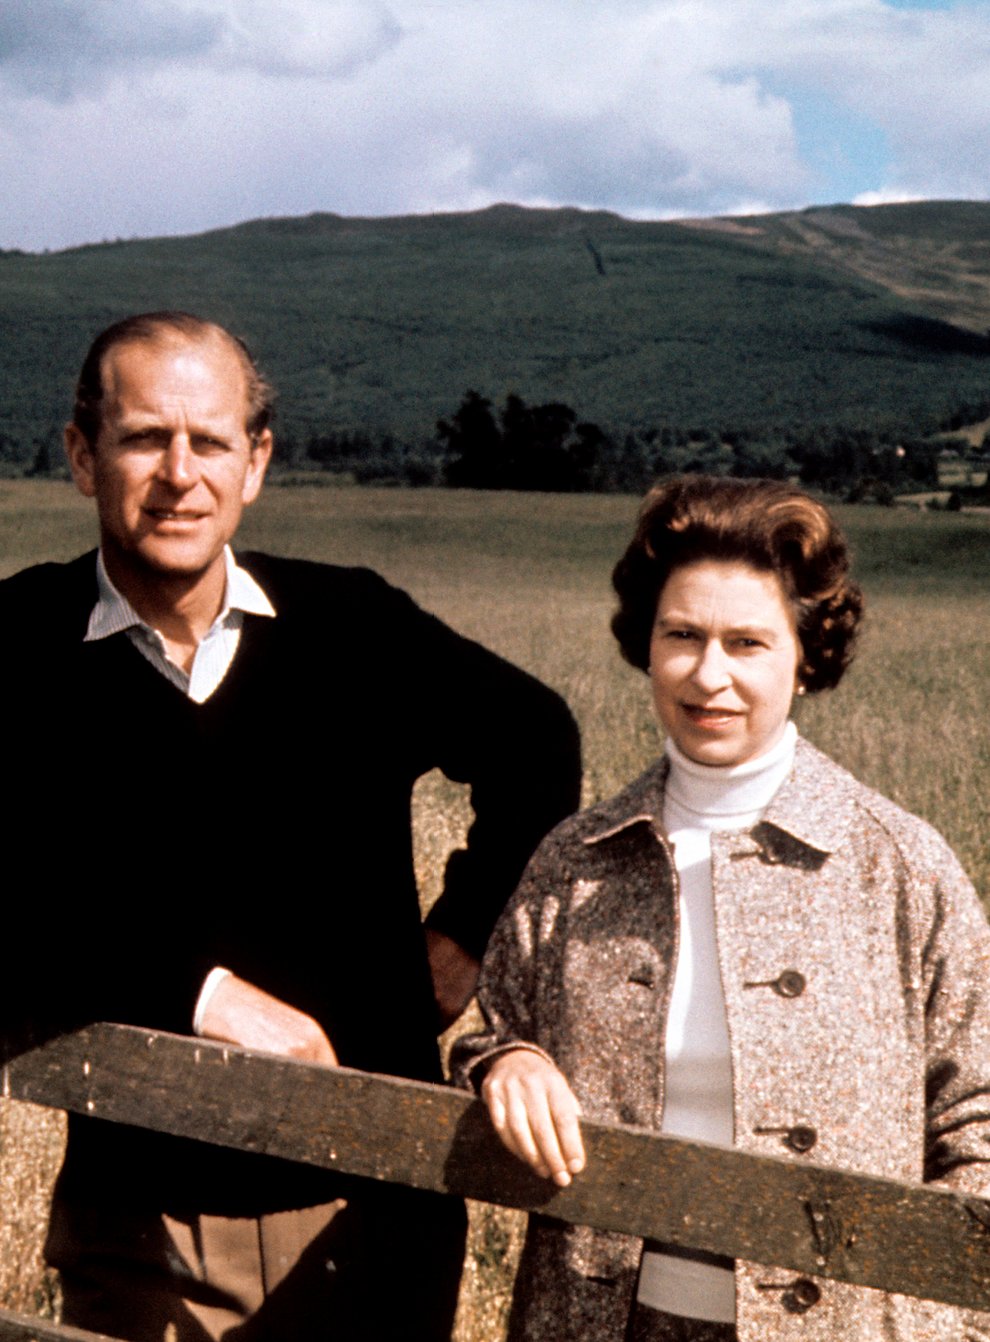 The Queen and Duke of Edinburgh celebrated their silver wedding anniversary at Balmoral in 1972 (PA)